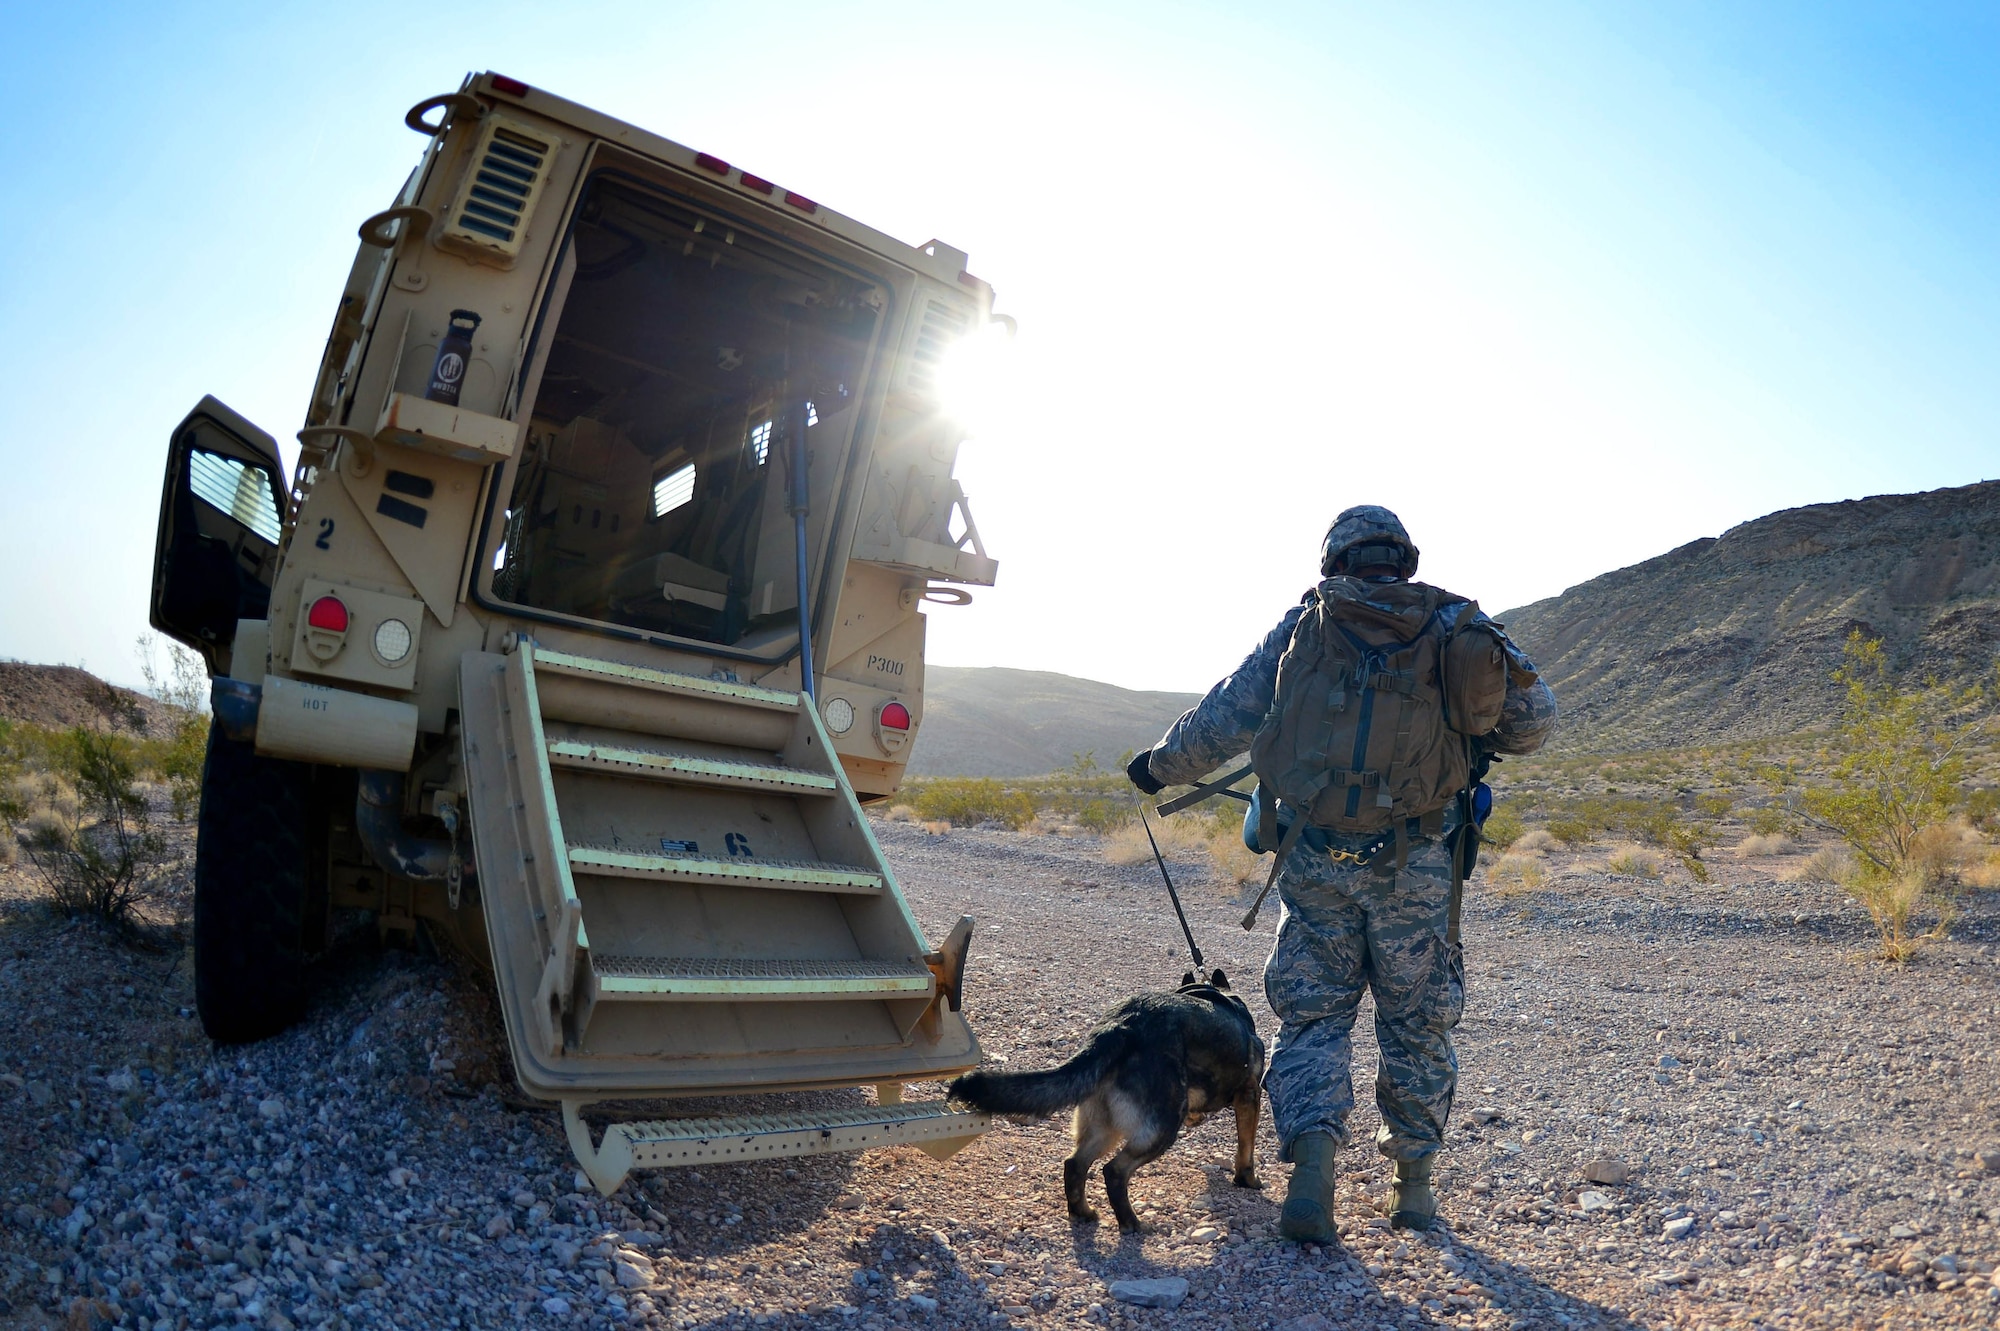 Senior Airman Kannyd, 799th Security Forces Squadron military working dog handler and Csoka, 799th SFS MWD, begin a training exercise Aug. 8, 2018, at Nellis Air Force Base, Nev. These teams are made of a K-9 MWD, their handler and a spotter to ensure the safety of the previous two. (U.S. Air Force Photo by Airman 1st Class Haley Stevens)